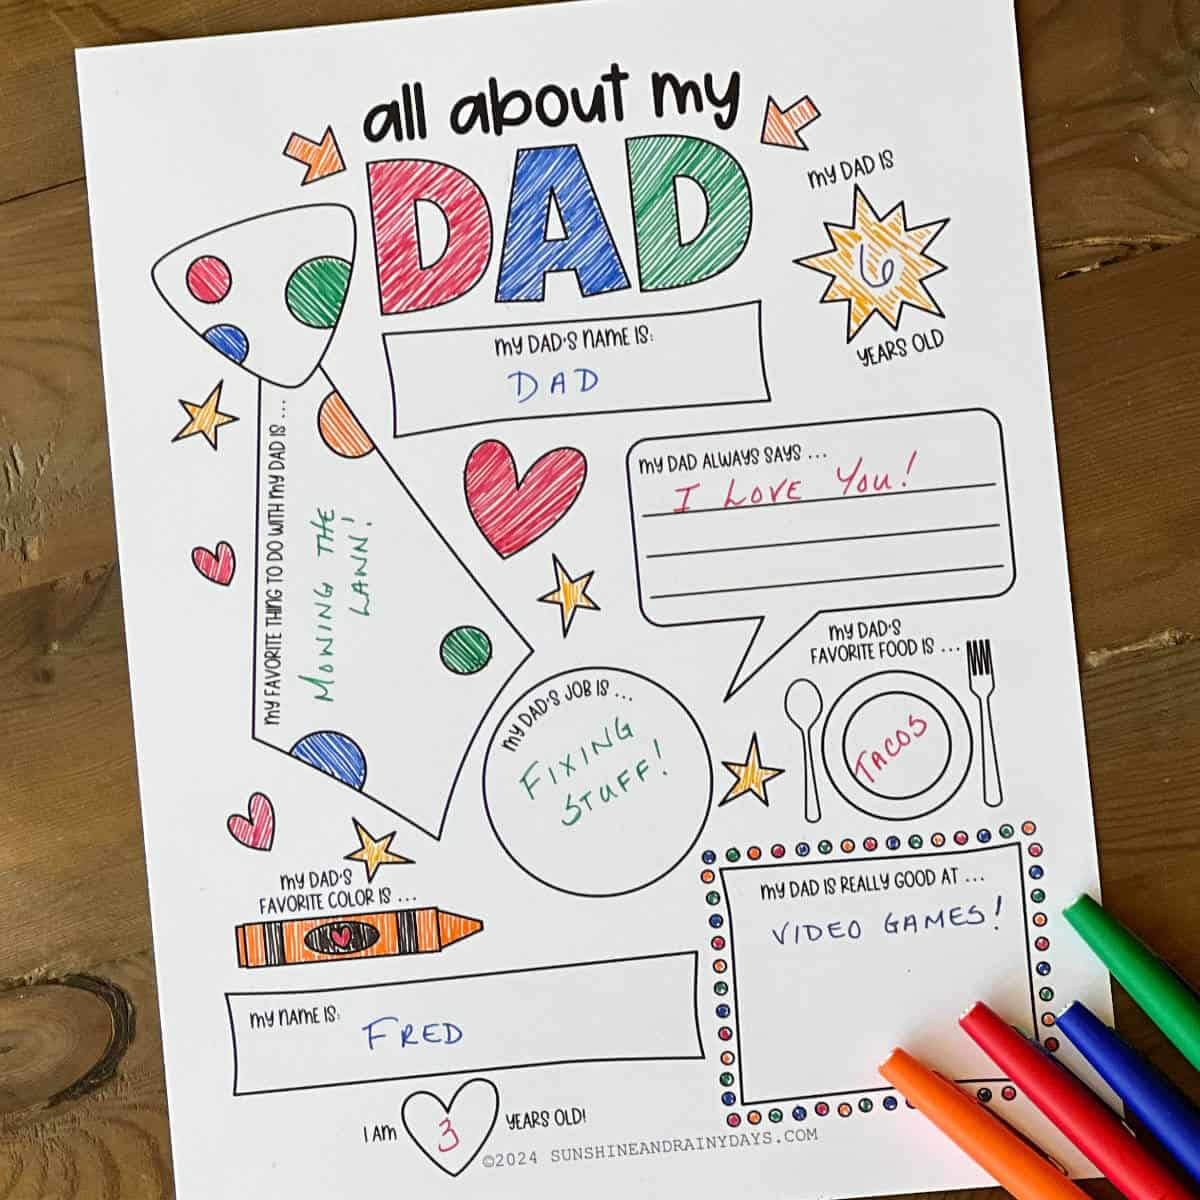 All about dad printable coloring page with prompts laying on a table with felt tip markers.